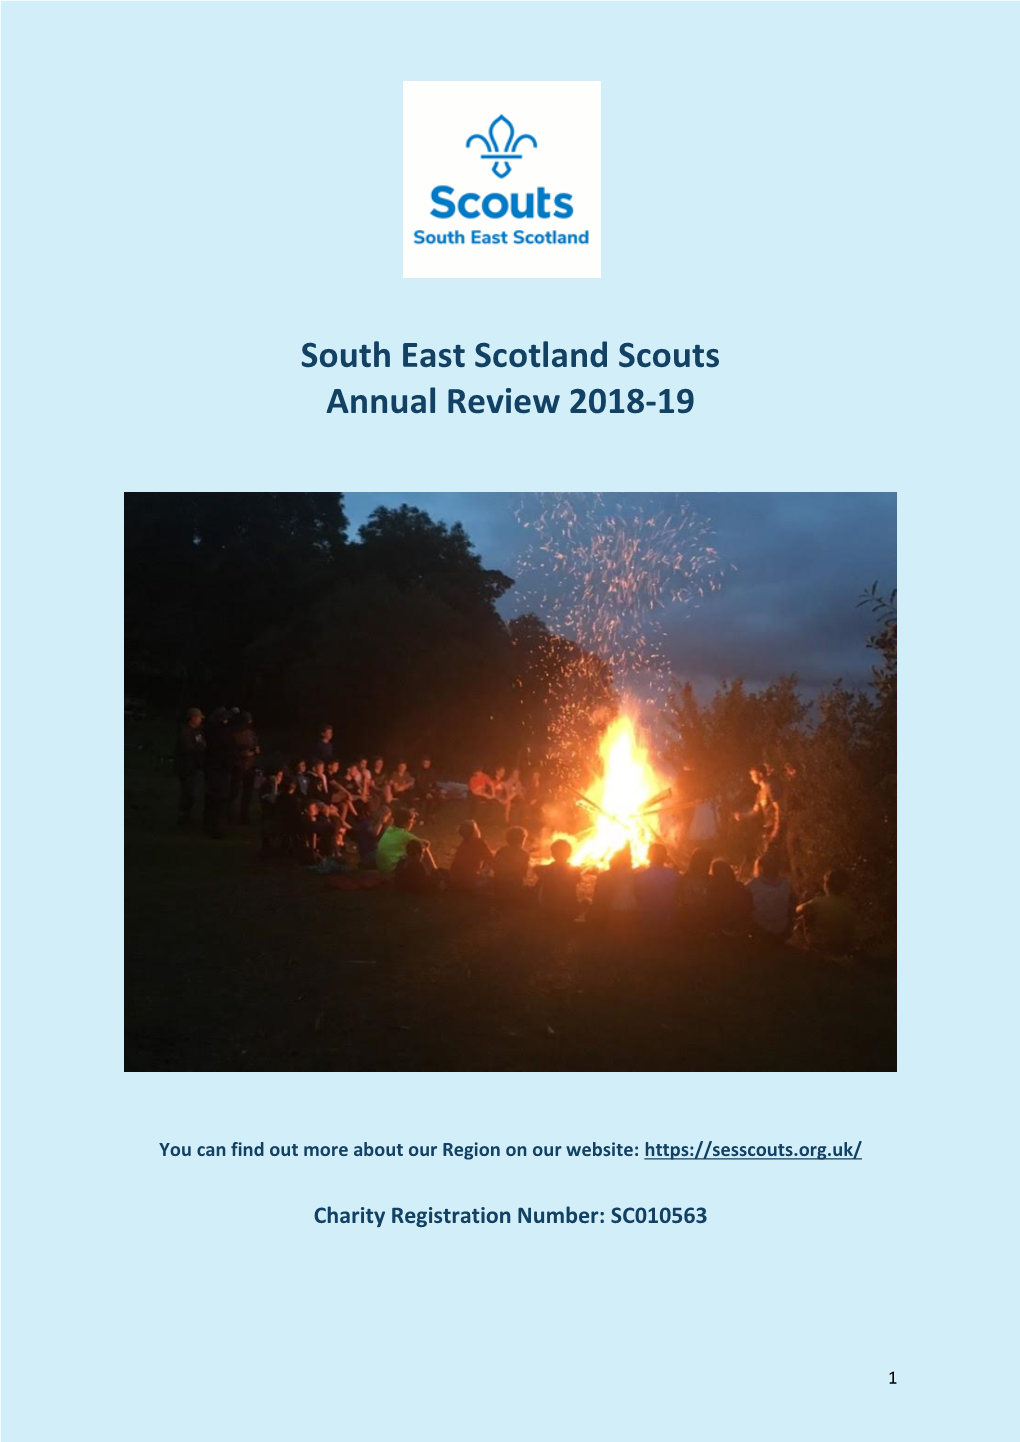 South East Scotland Scouts Annual Review 2018-19